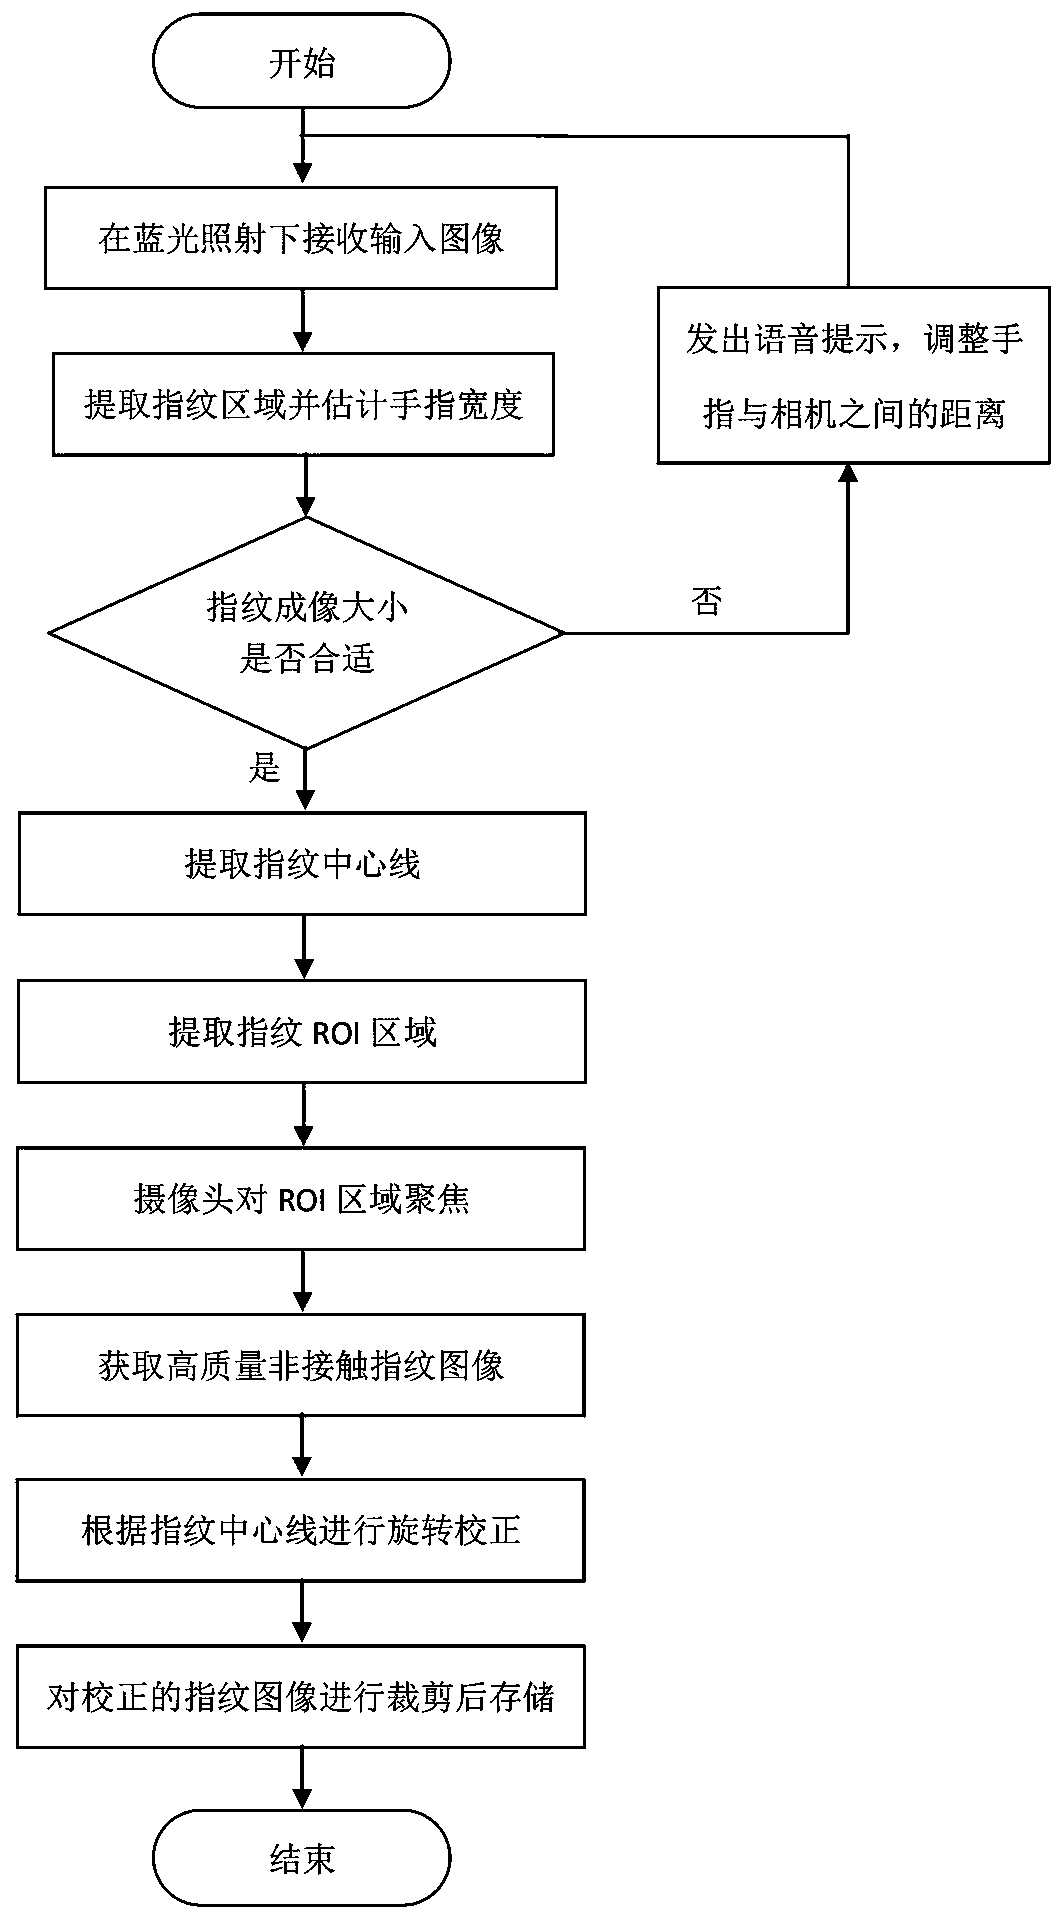 Camera-based non-contact fingerprint image acquisition apparatus and method